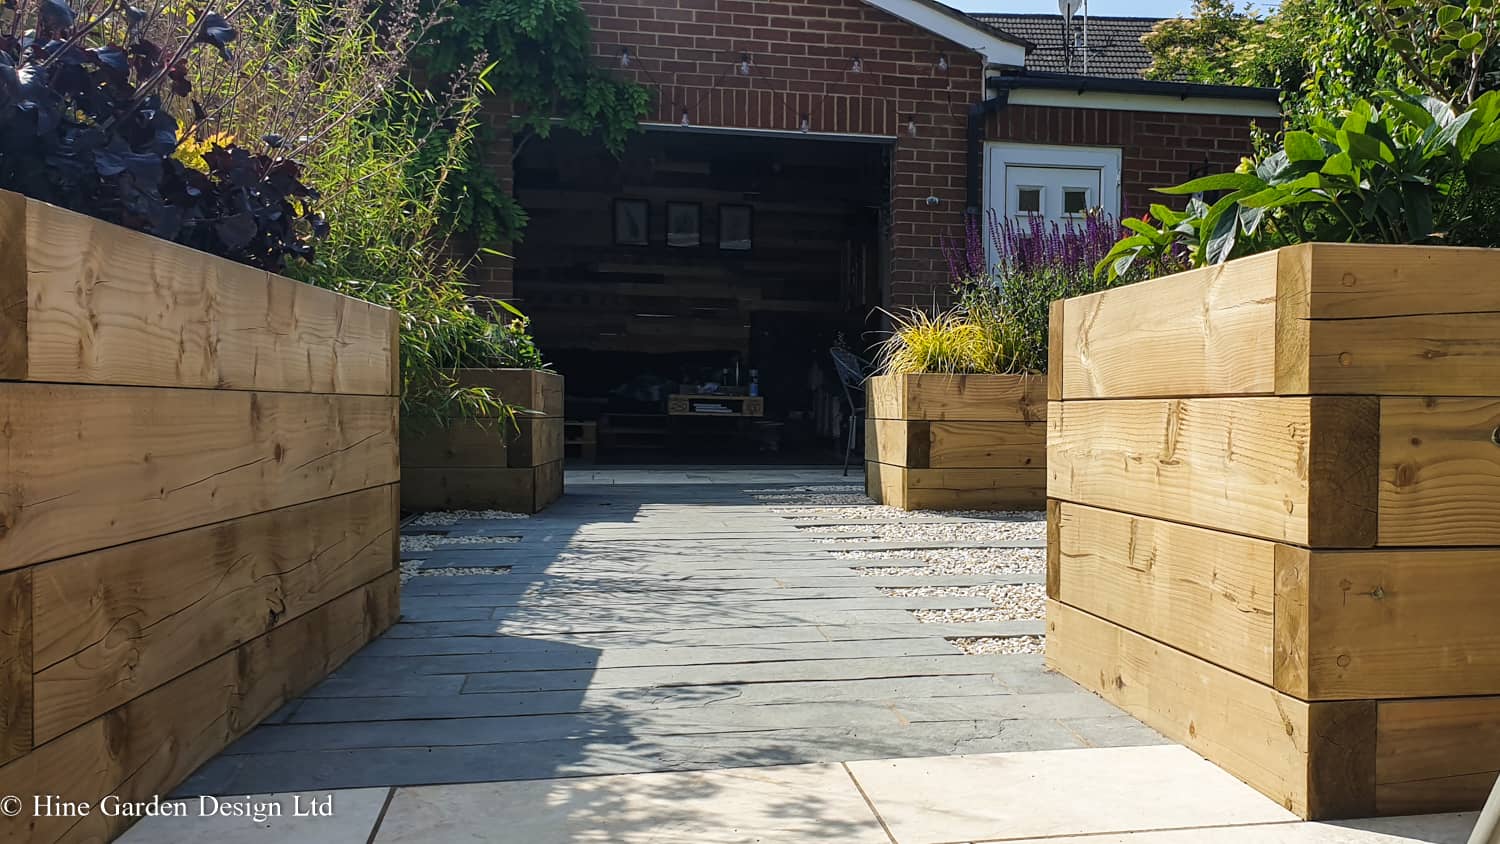 garden spaces created using raised bends and landscaping materials